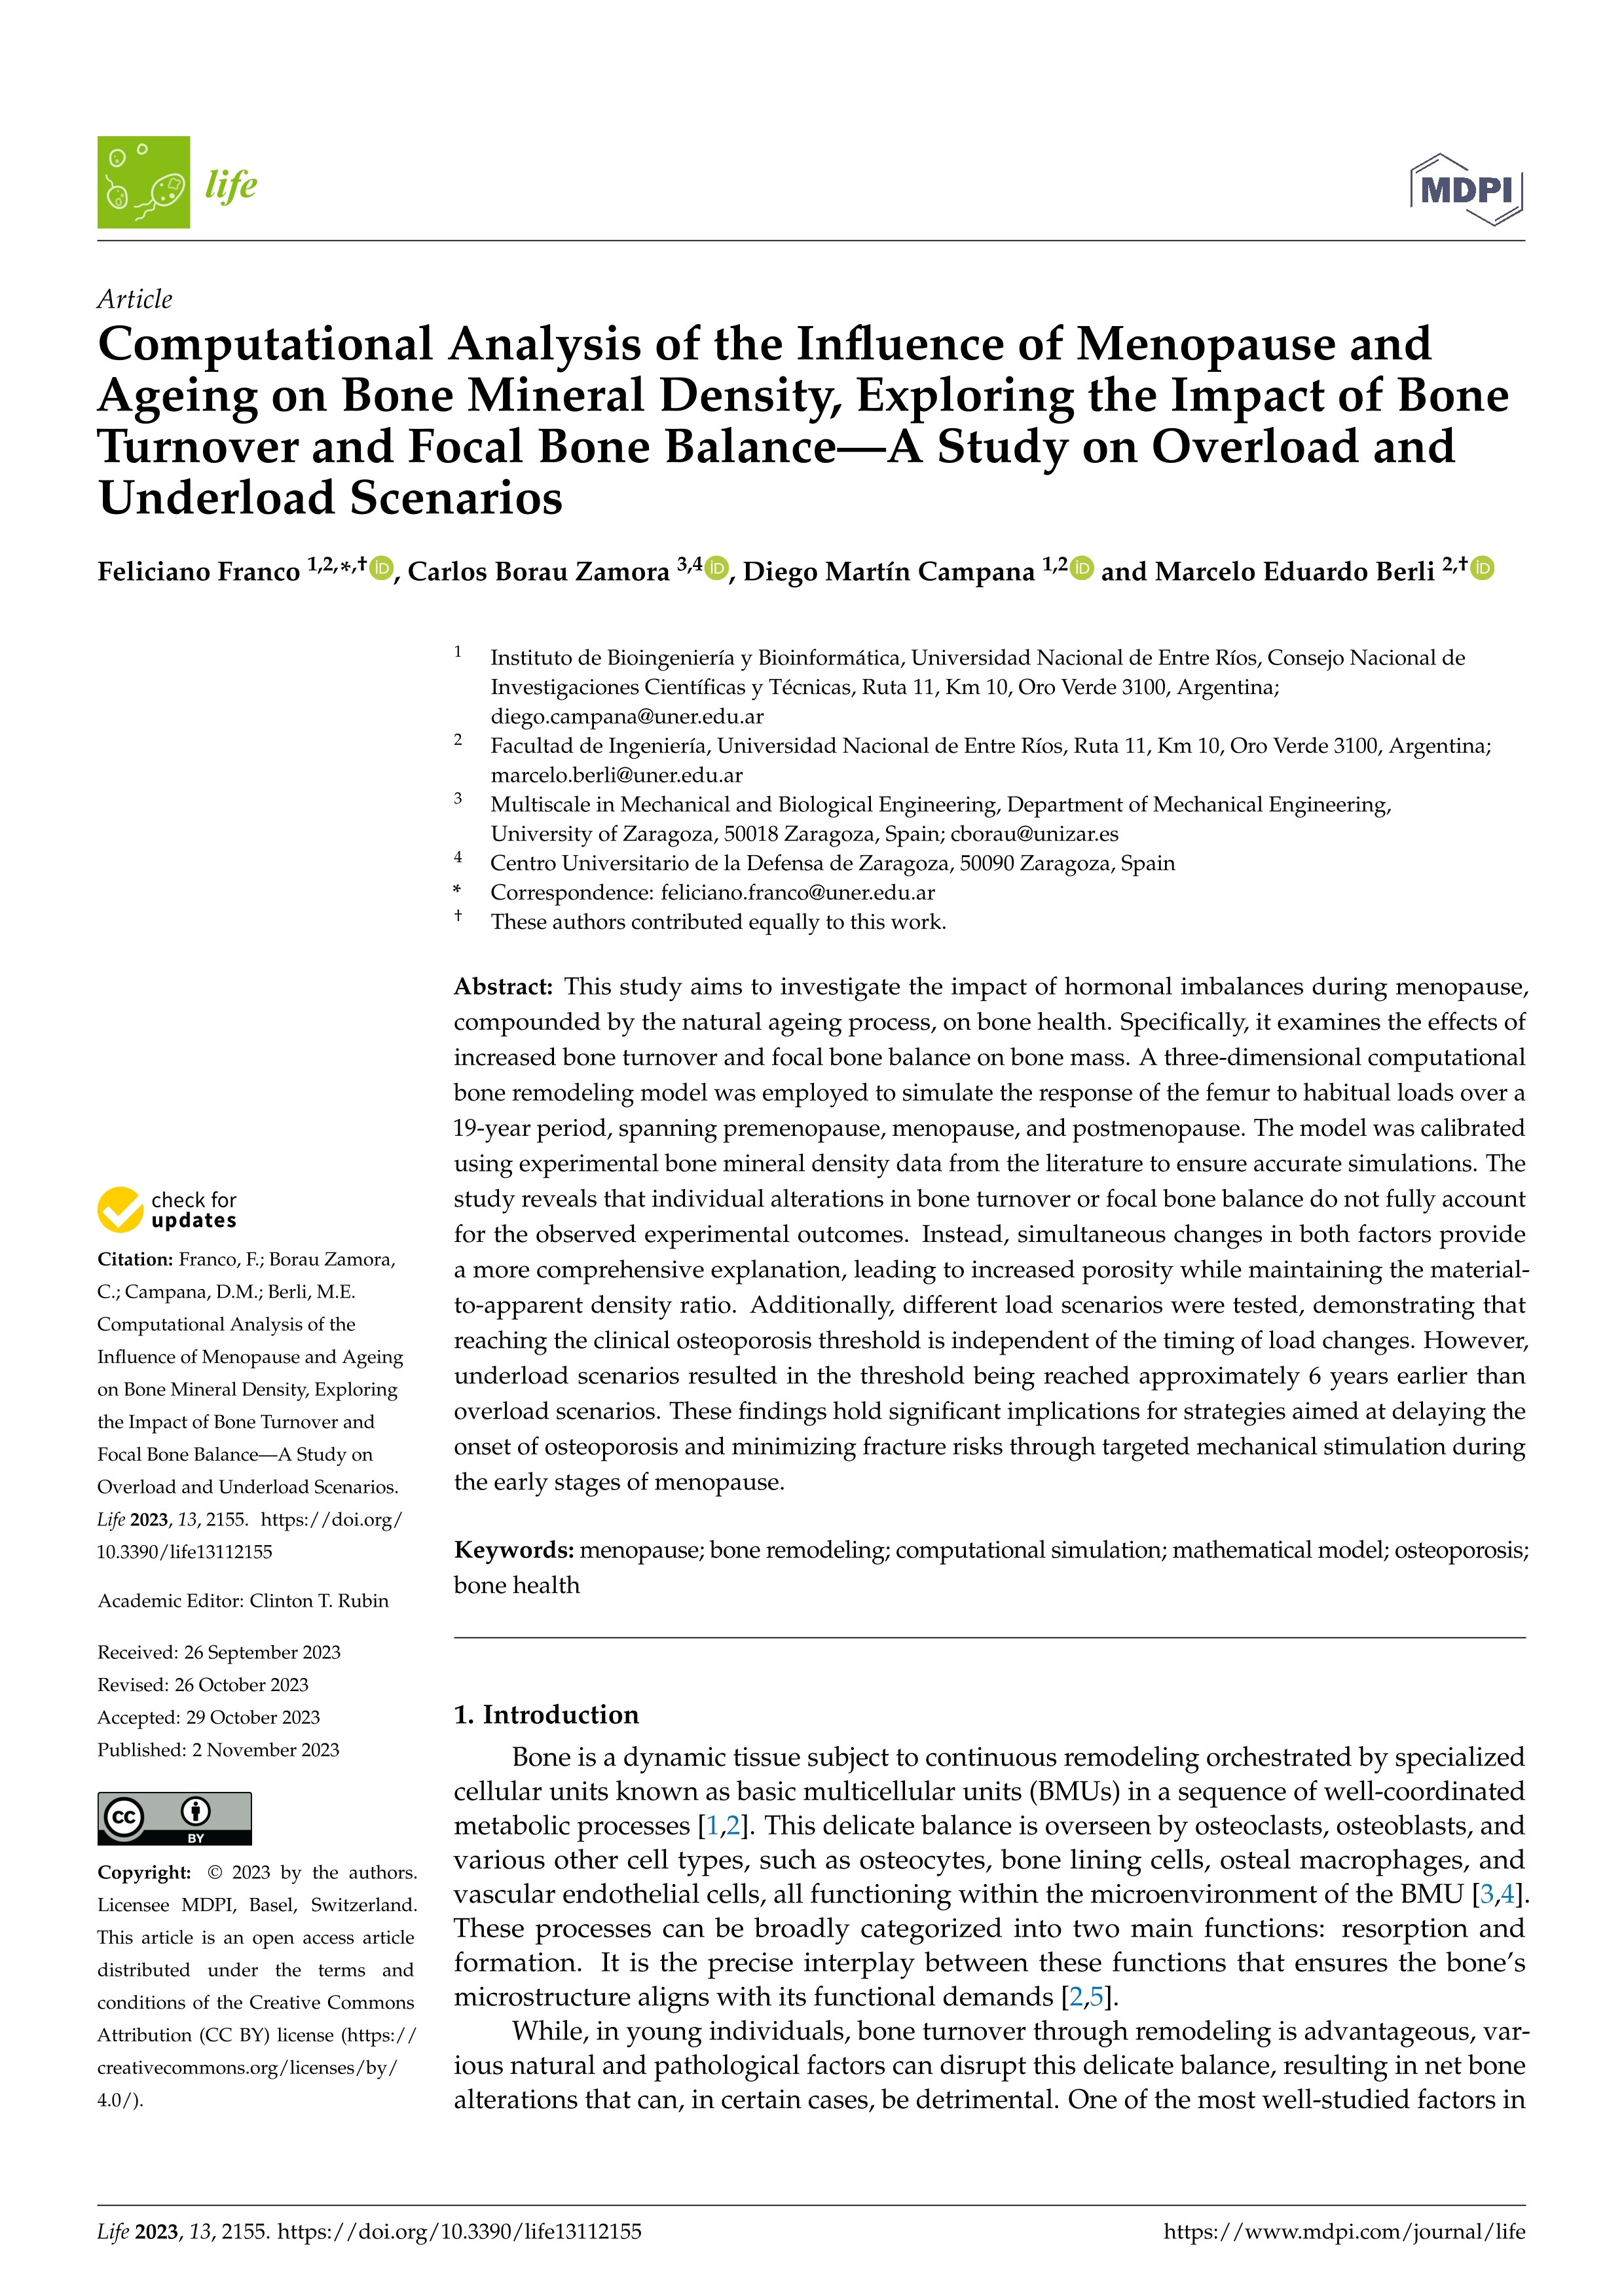 Computational analysis of the influence of menopause and ageing on bone mineral density, exploring the impact of bone turnover and focal bone balance—a study on overload and underload scenarios